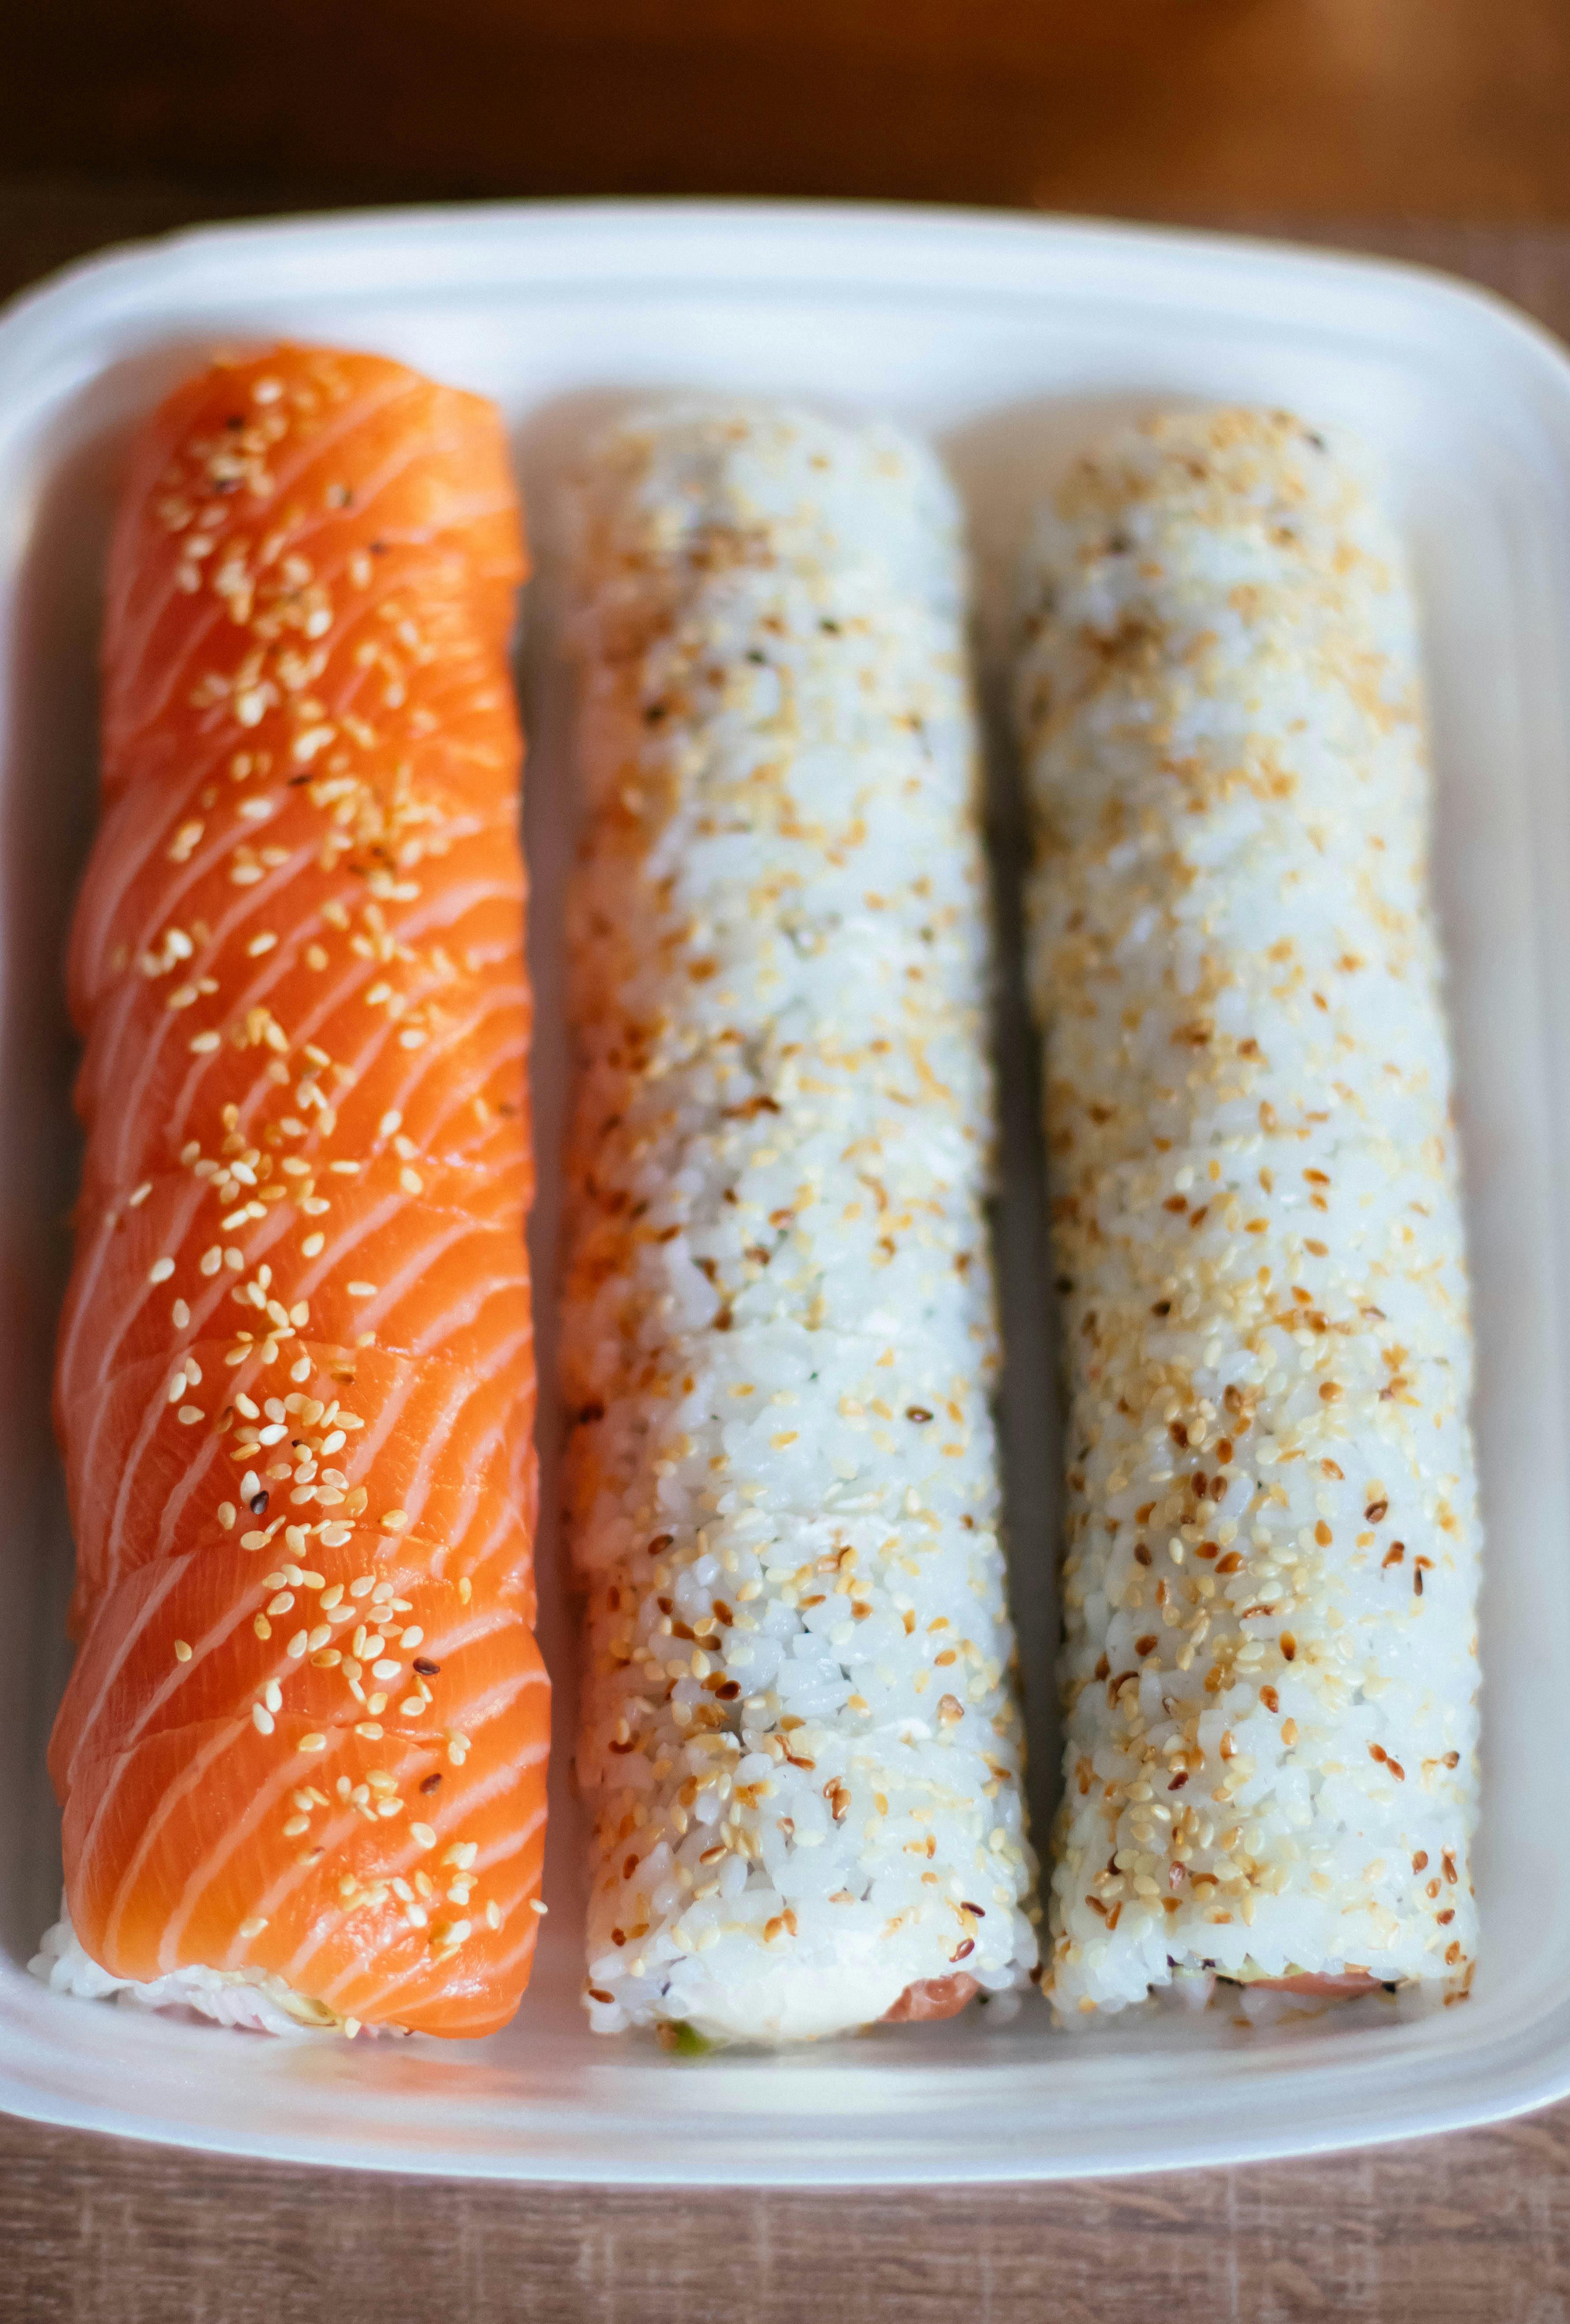 Three Sushi Rolls in White Plastic Container · Free Stock Photo